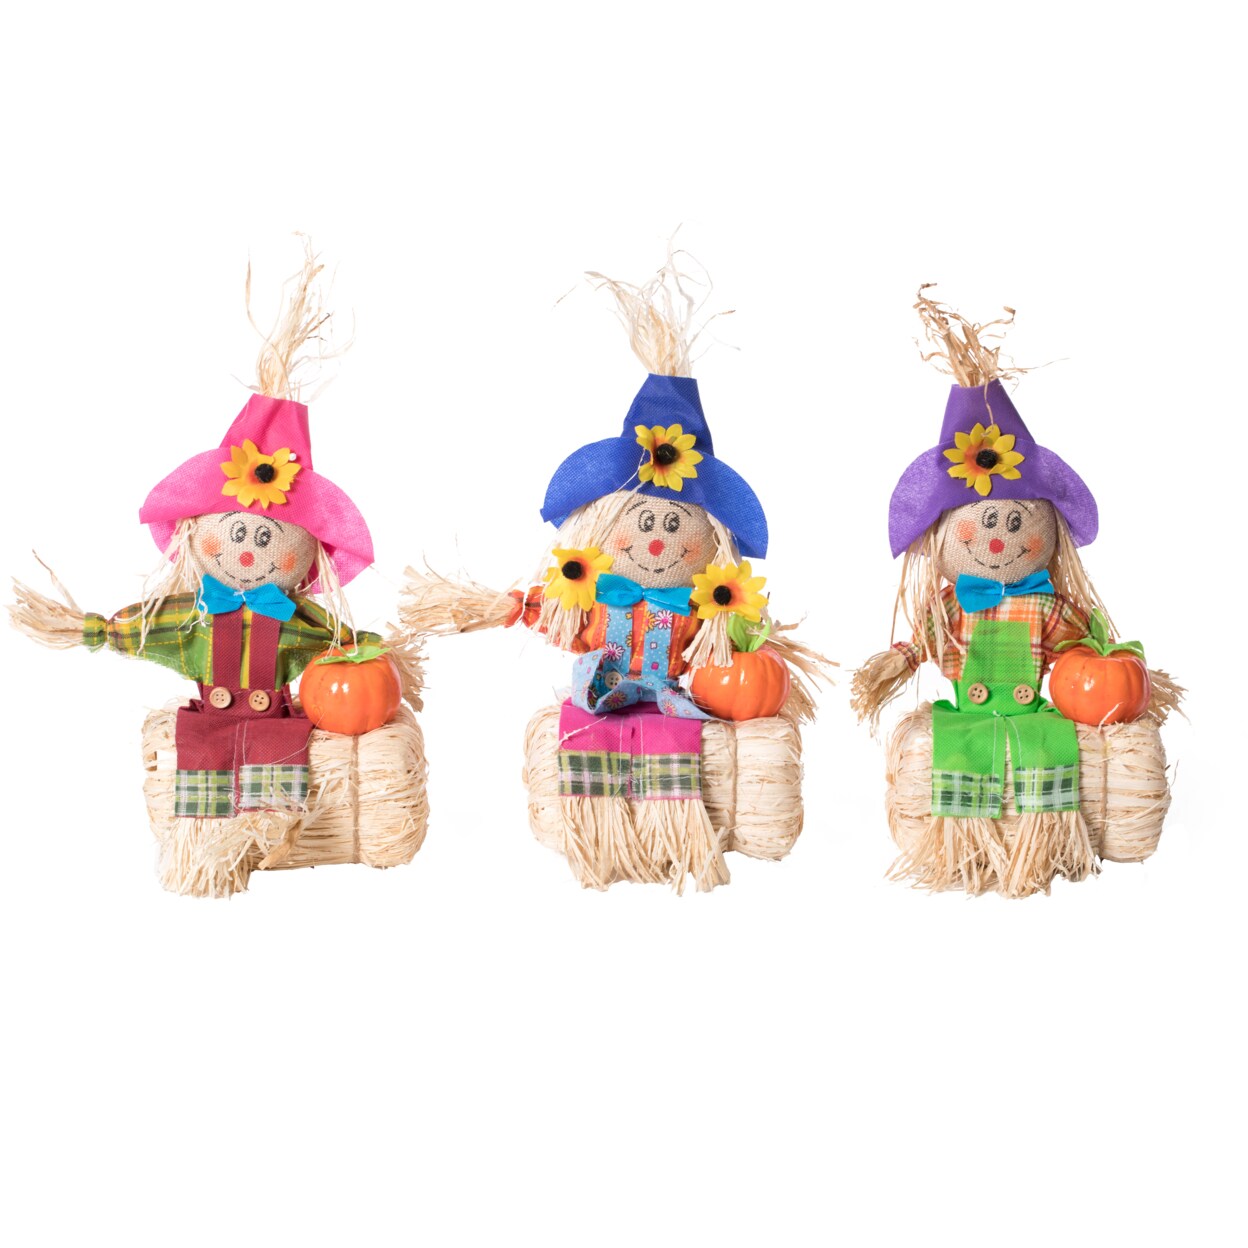 Gardenised   12 Inch Sitting on Straw and Hay Bales Multicolor Trio Scarecrows for Halloween Fall and All Time Season